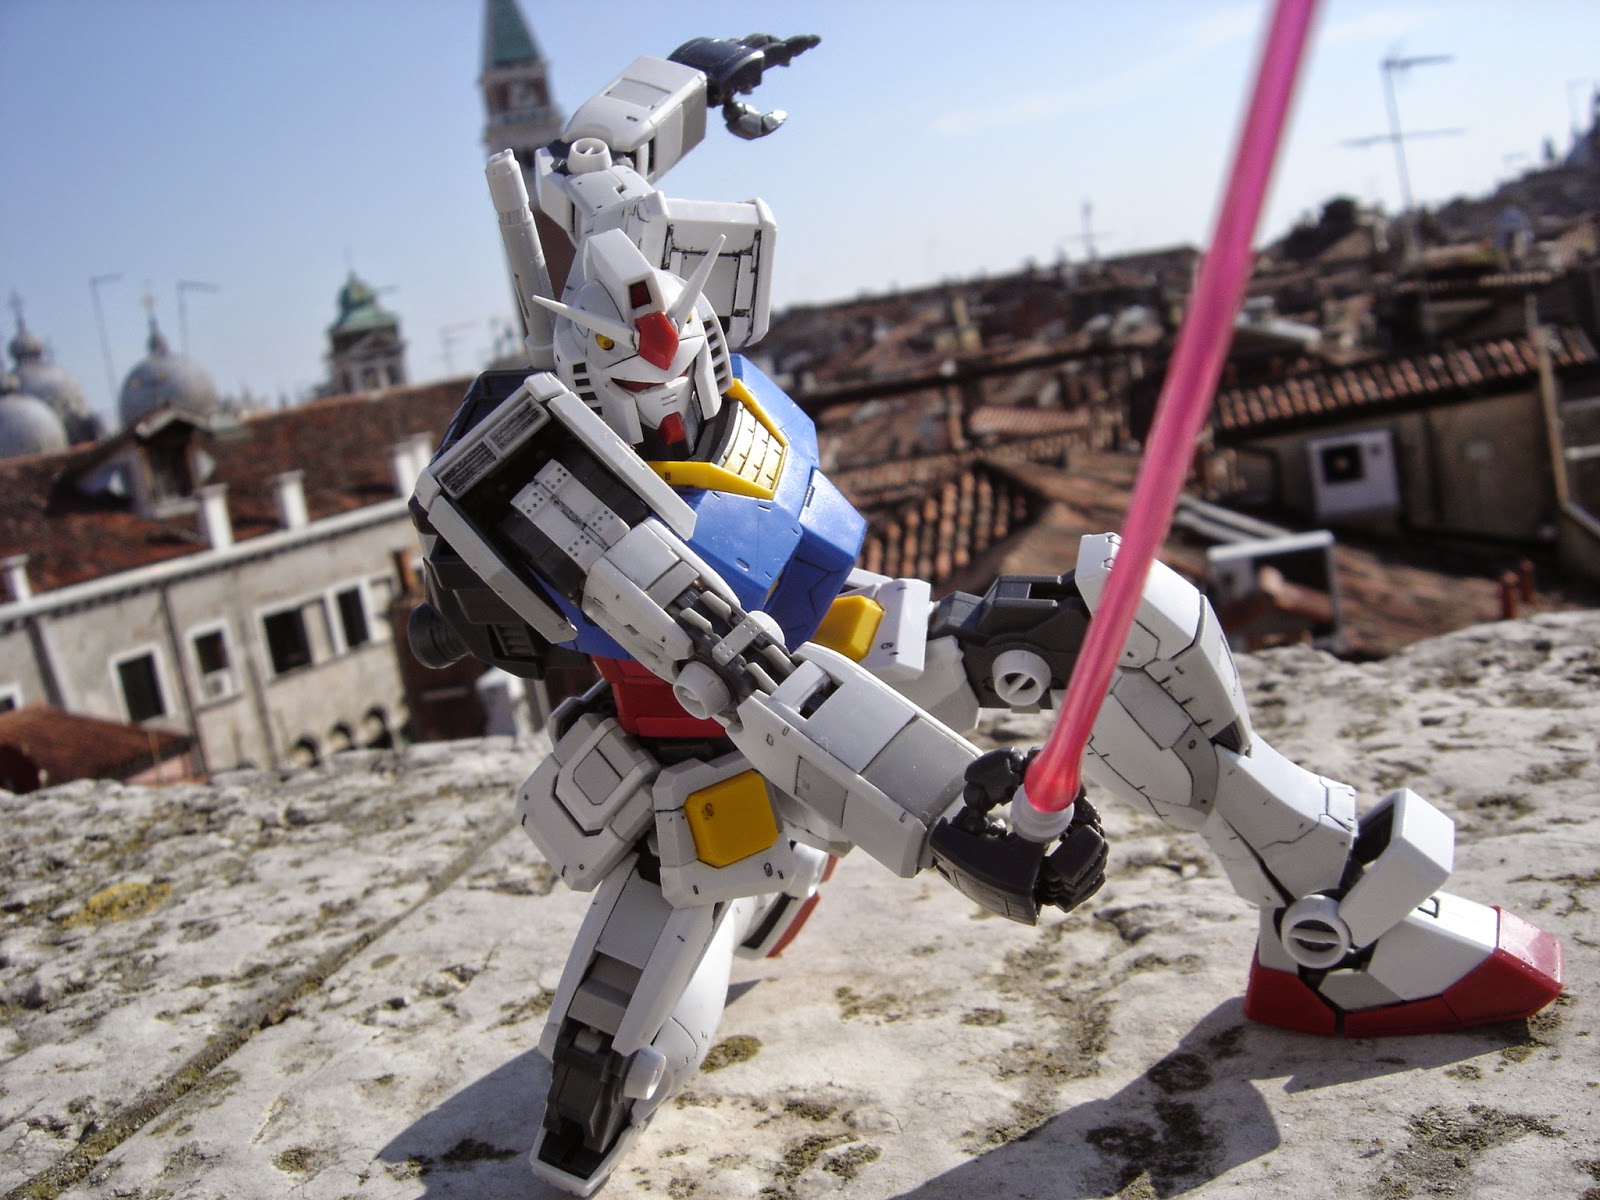 hi guys, this time I would like to share some ideas about posing the RX-78-...